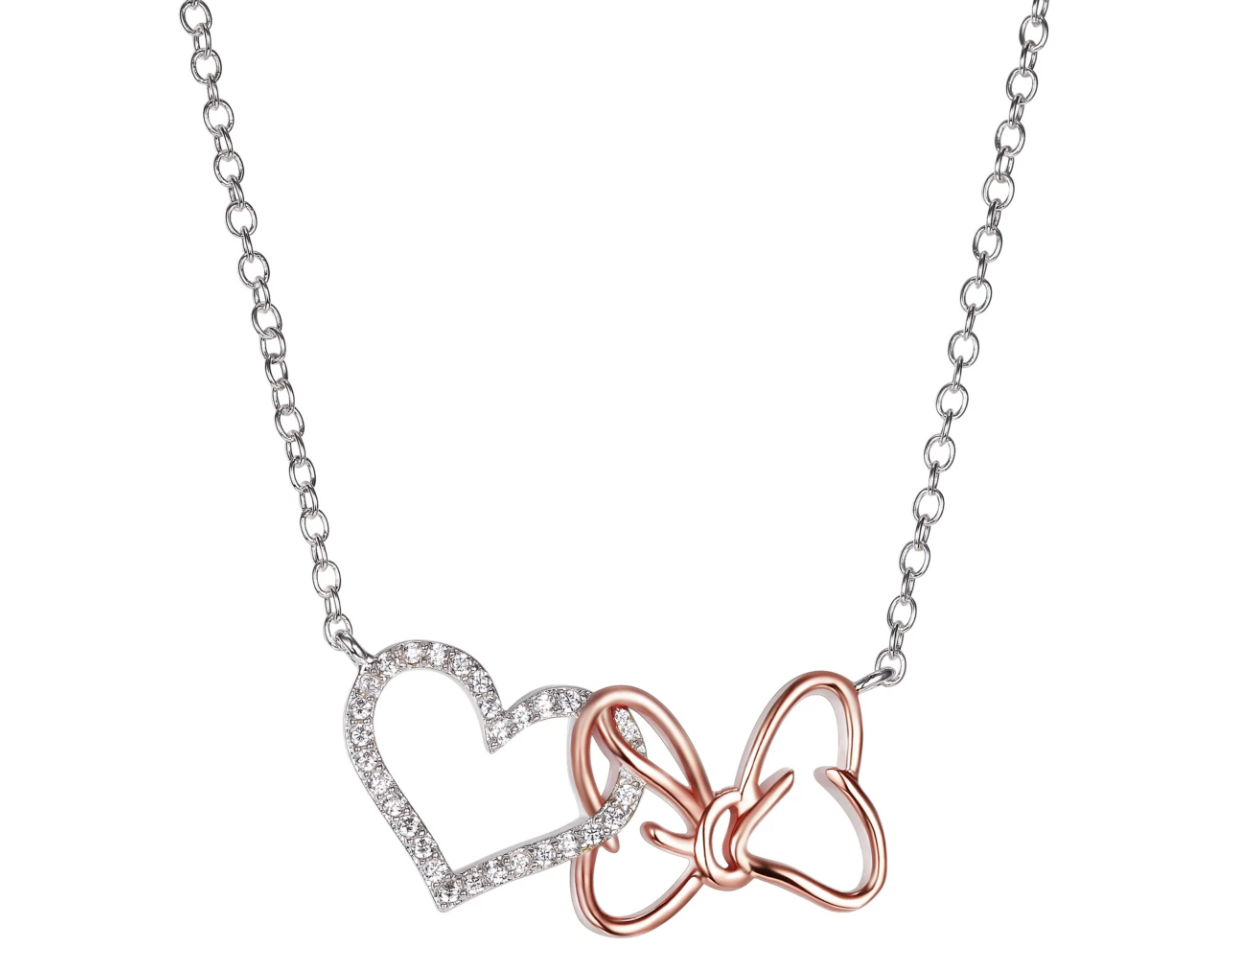 The silver heart and bow necklace, the heart has crystals on it and the bow is rose gold